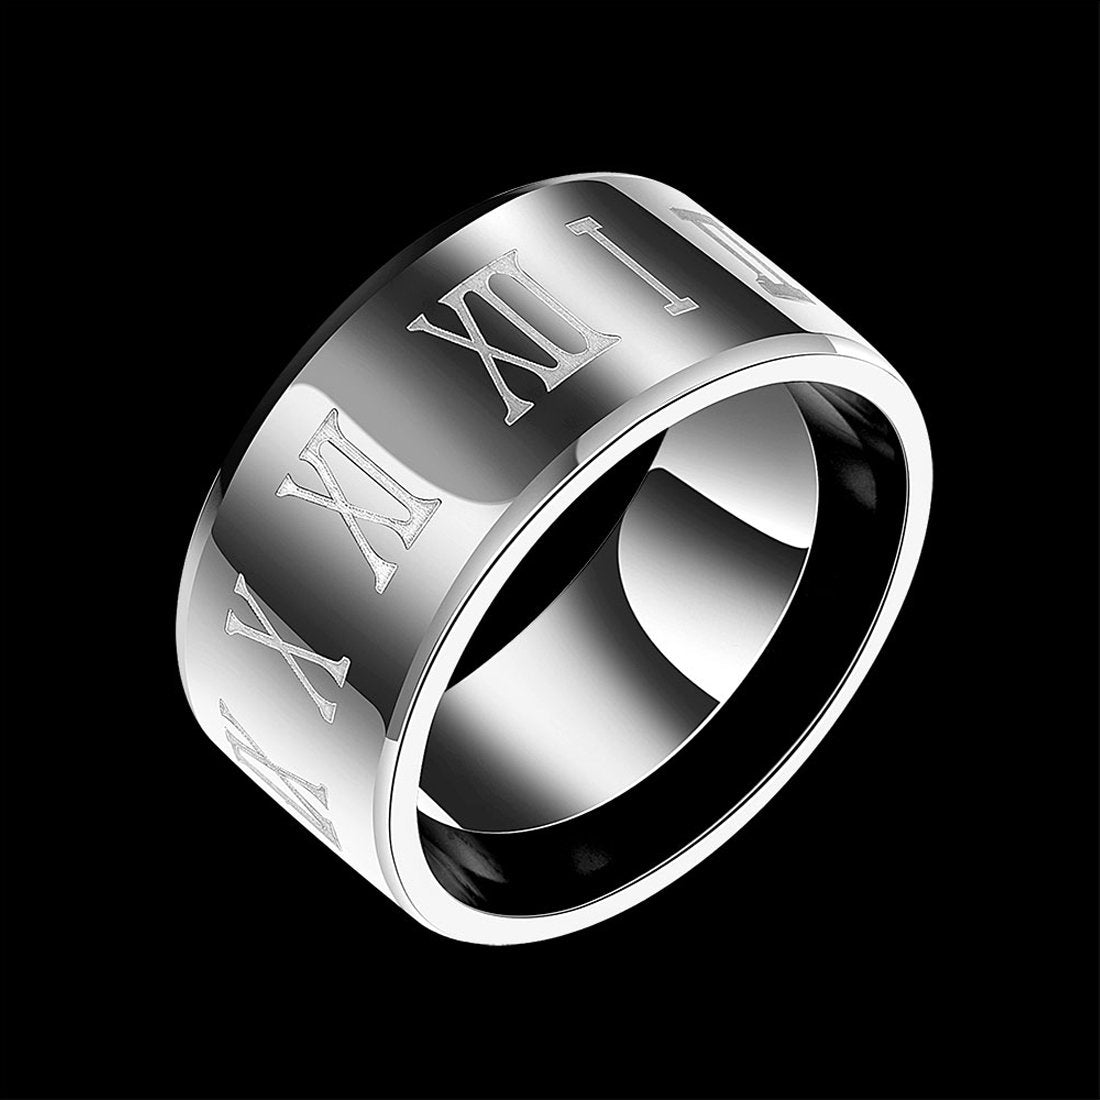 Yellow Chimes Roman Numerals Engraved Finger-Thumb Stainless Steel Ring for Men and Boys